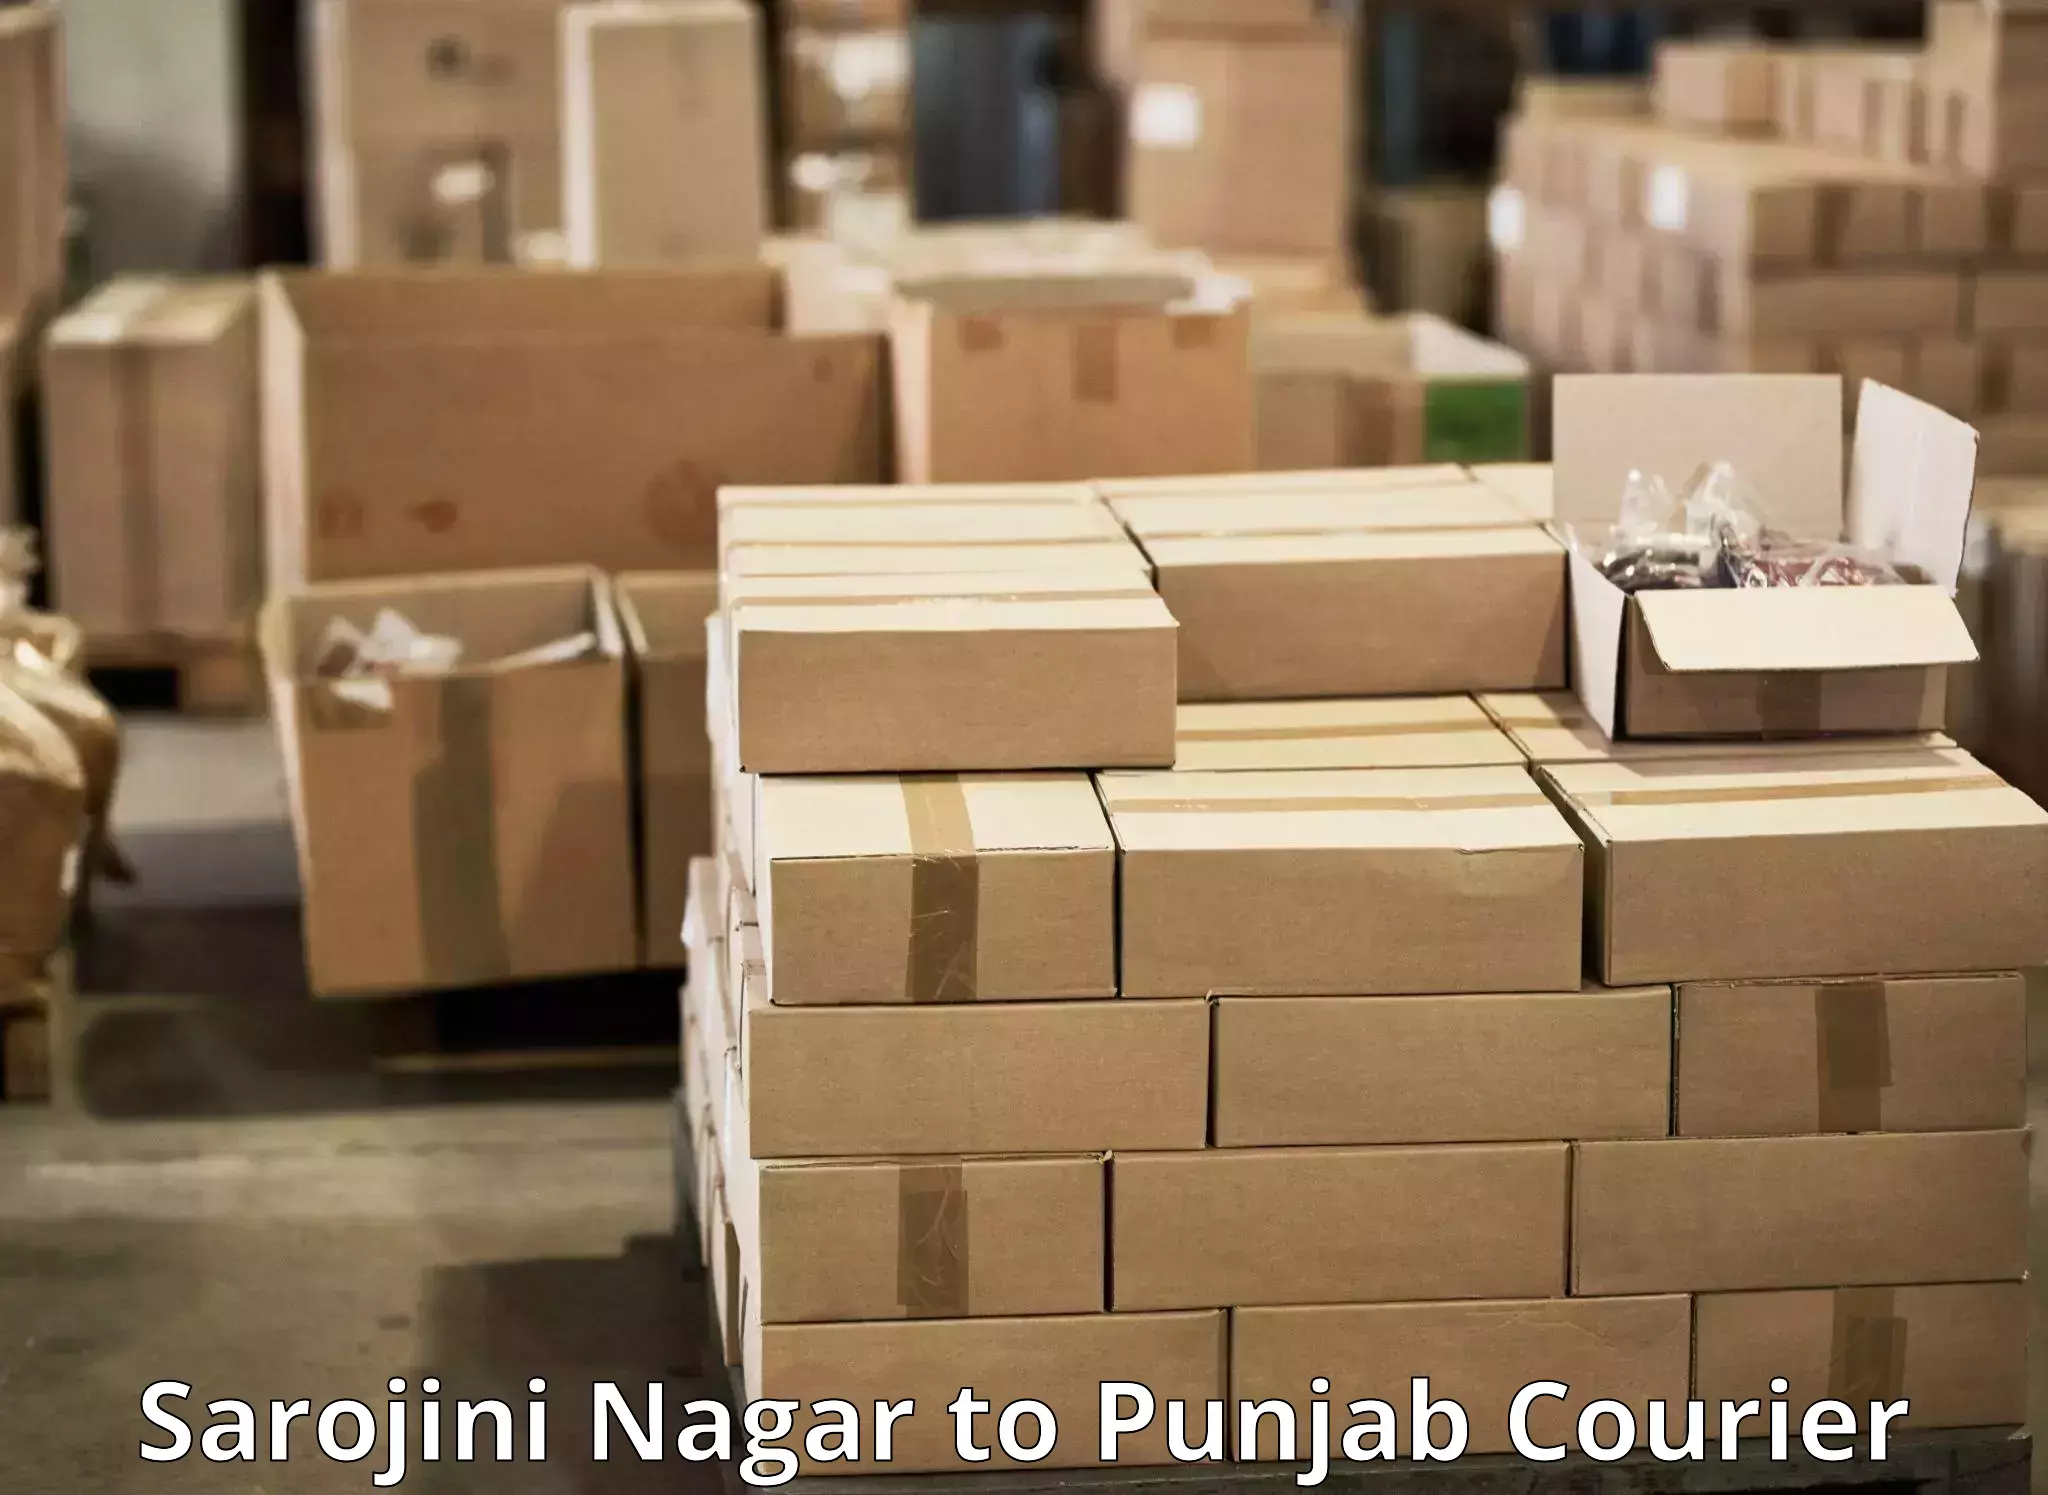 Overnight delivery services Sarojini Nagar to Pathankot